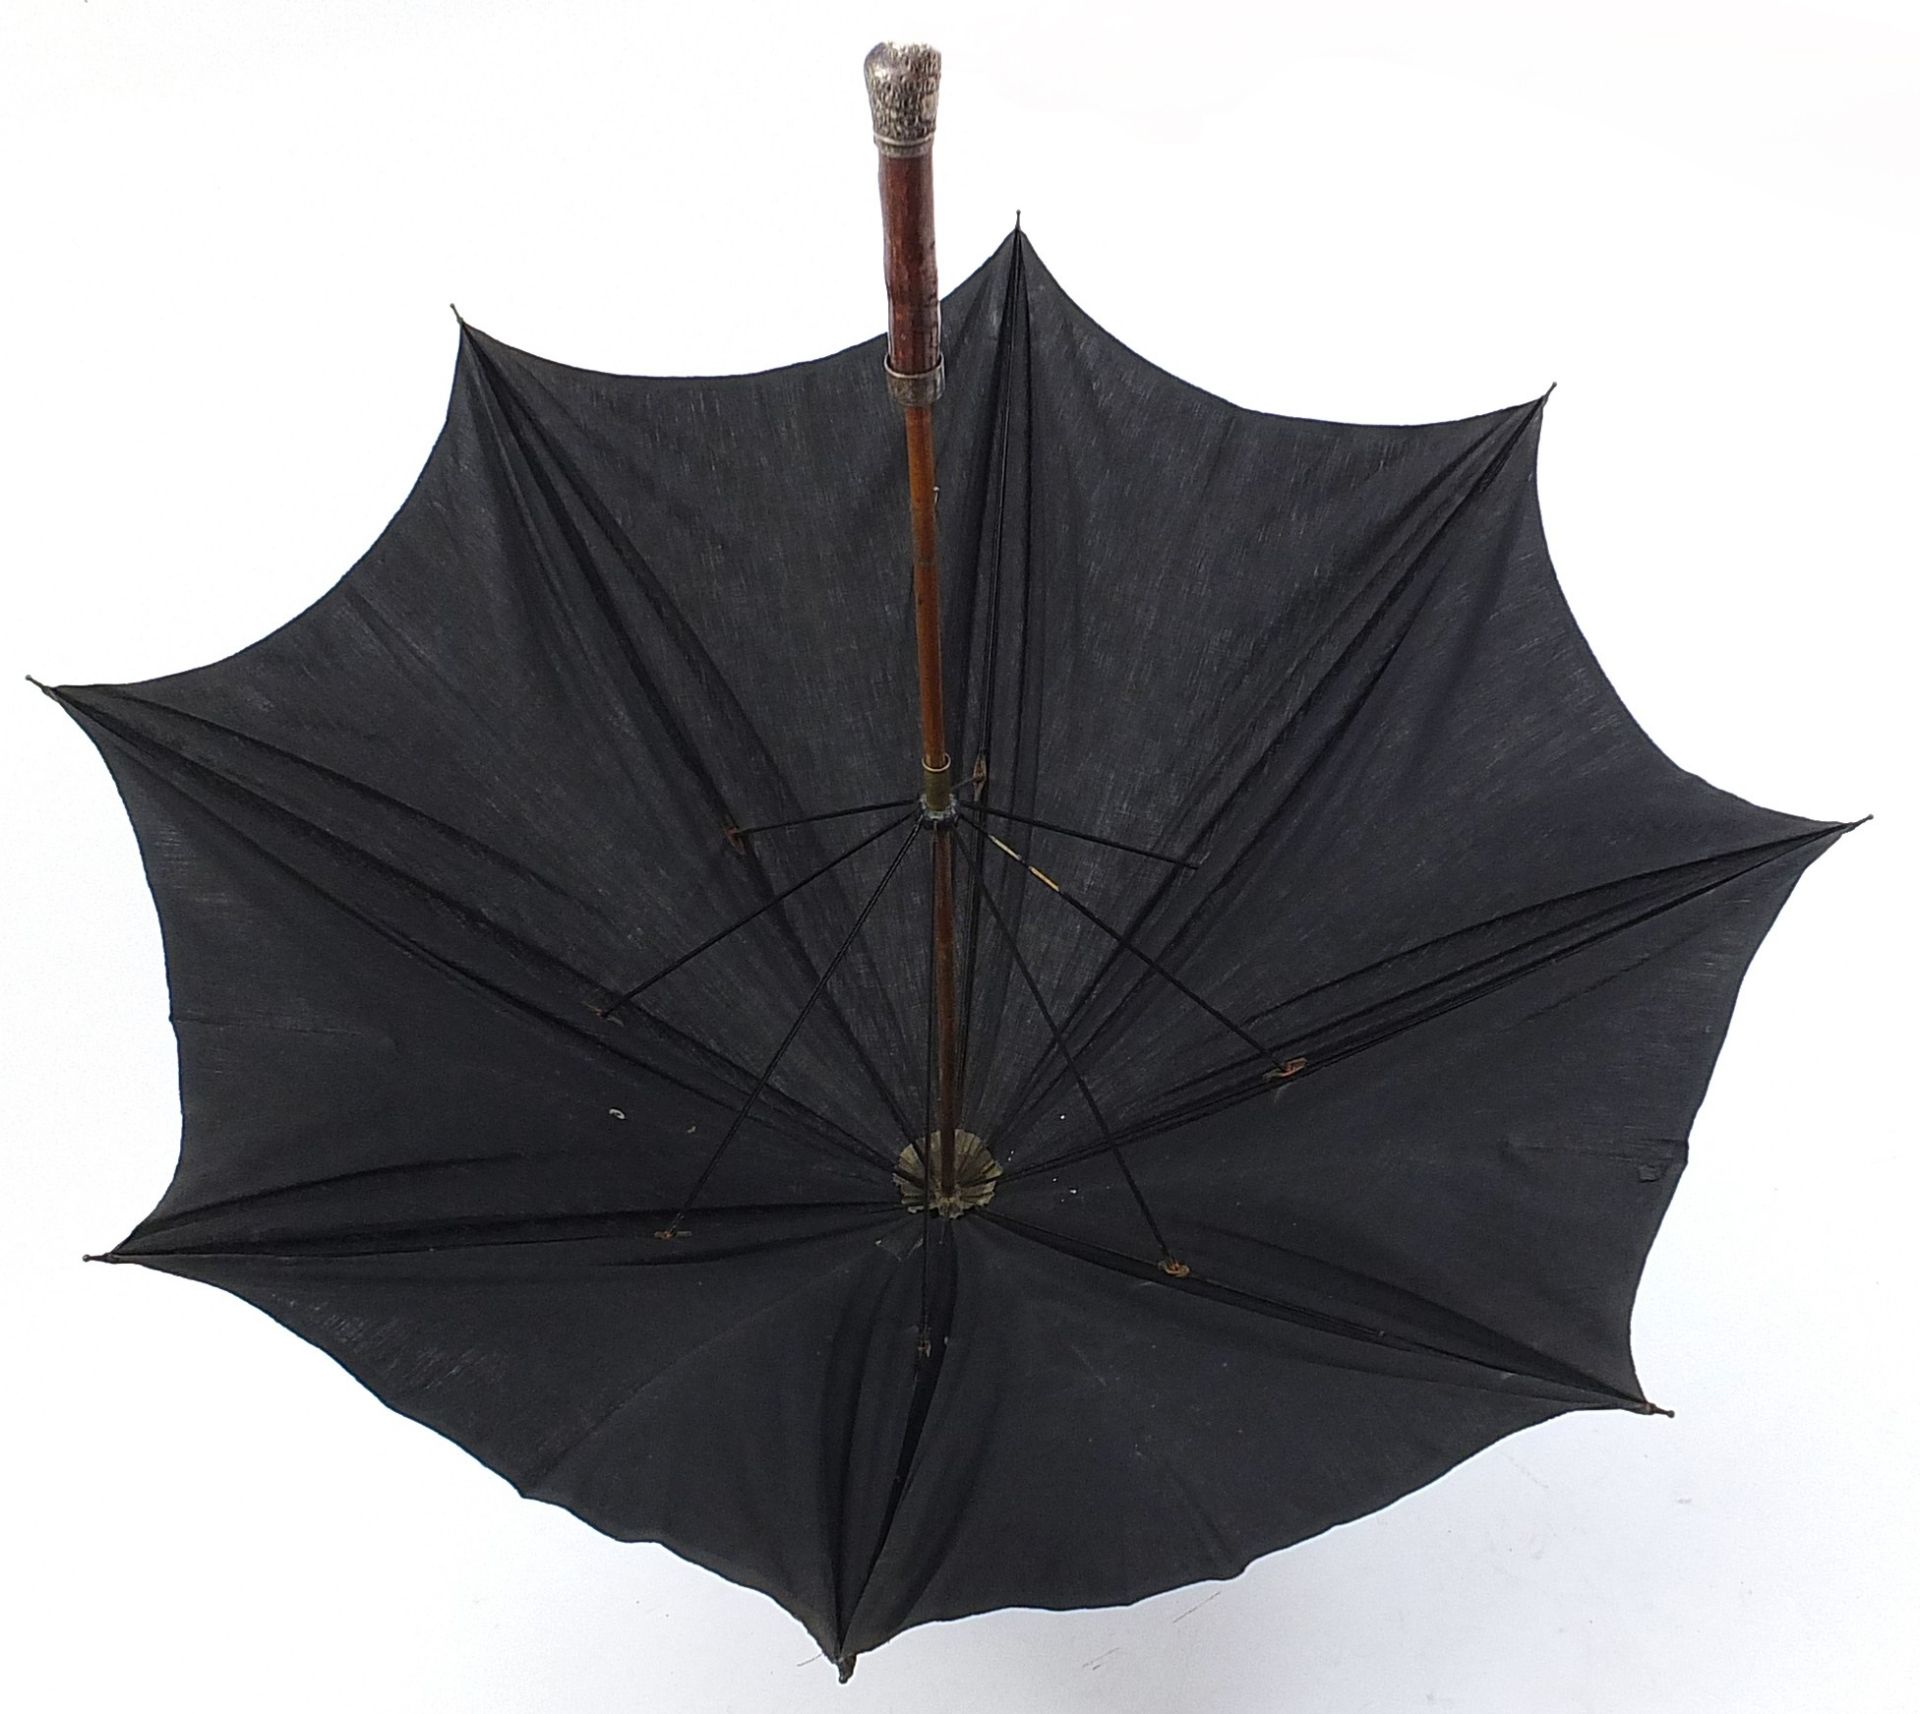 S Fox & Co parasol with naturalistic handle and silver pommel, 91cm in length - Image 7 of 7